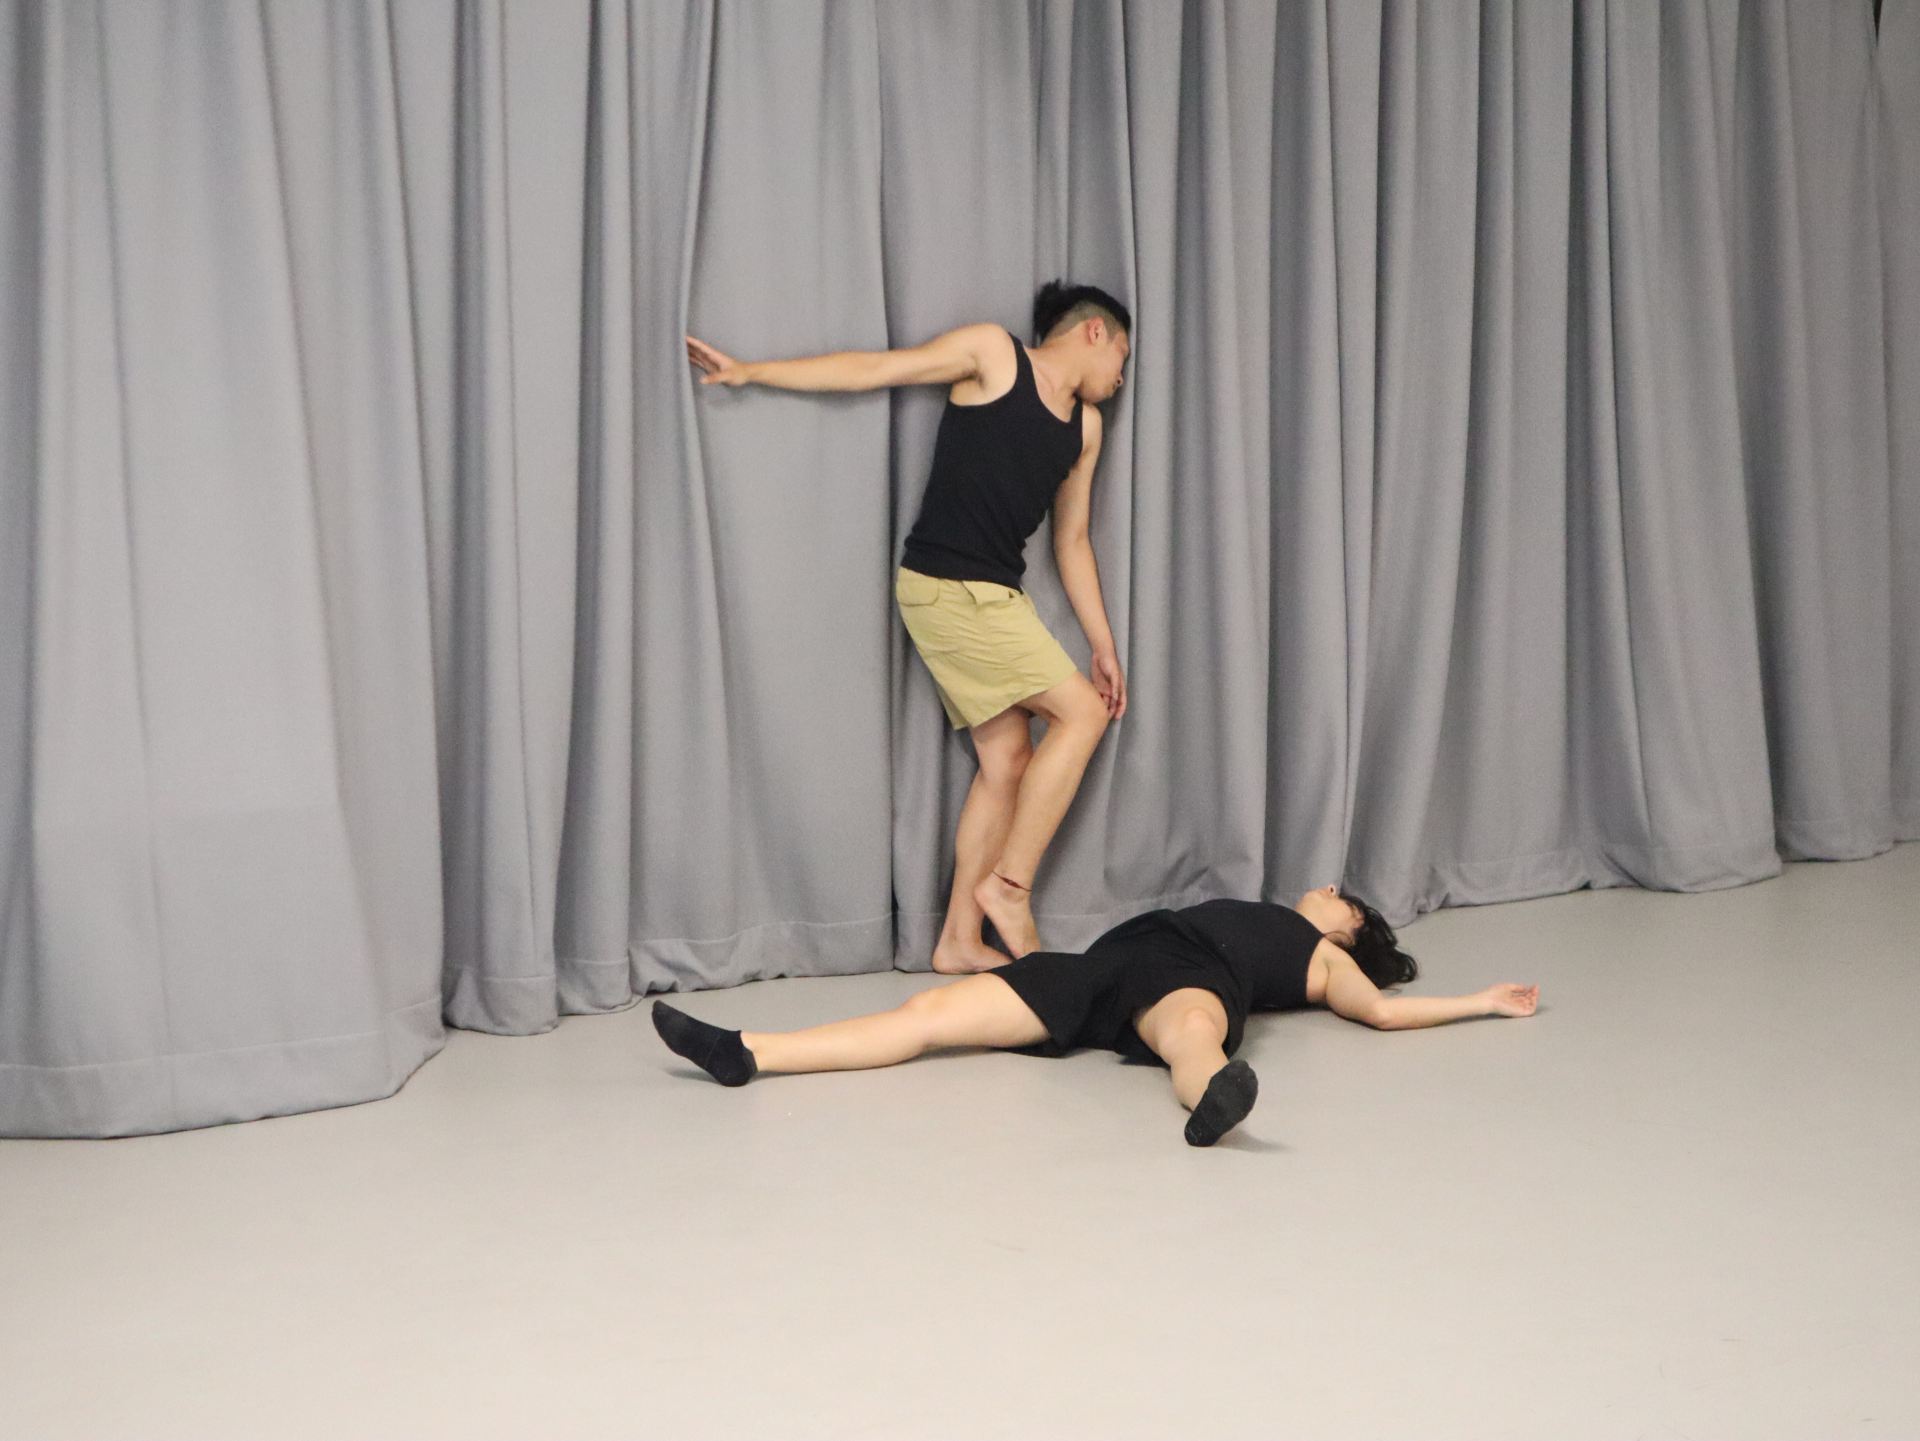 Documentation of two people physically performing in a grey room.